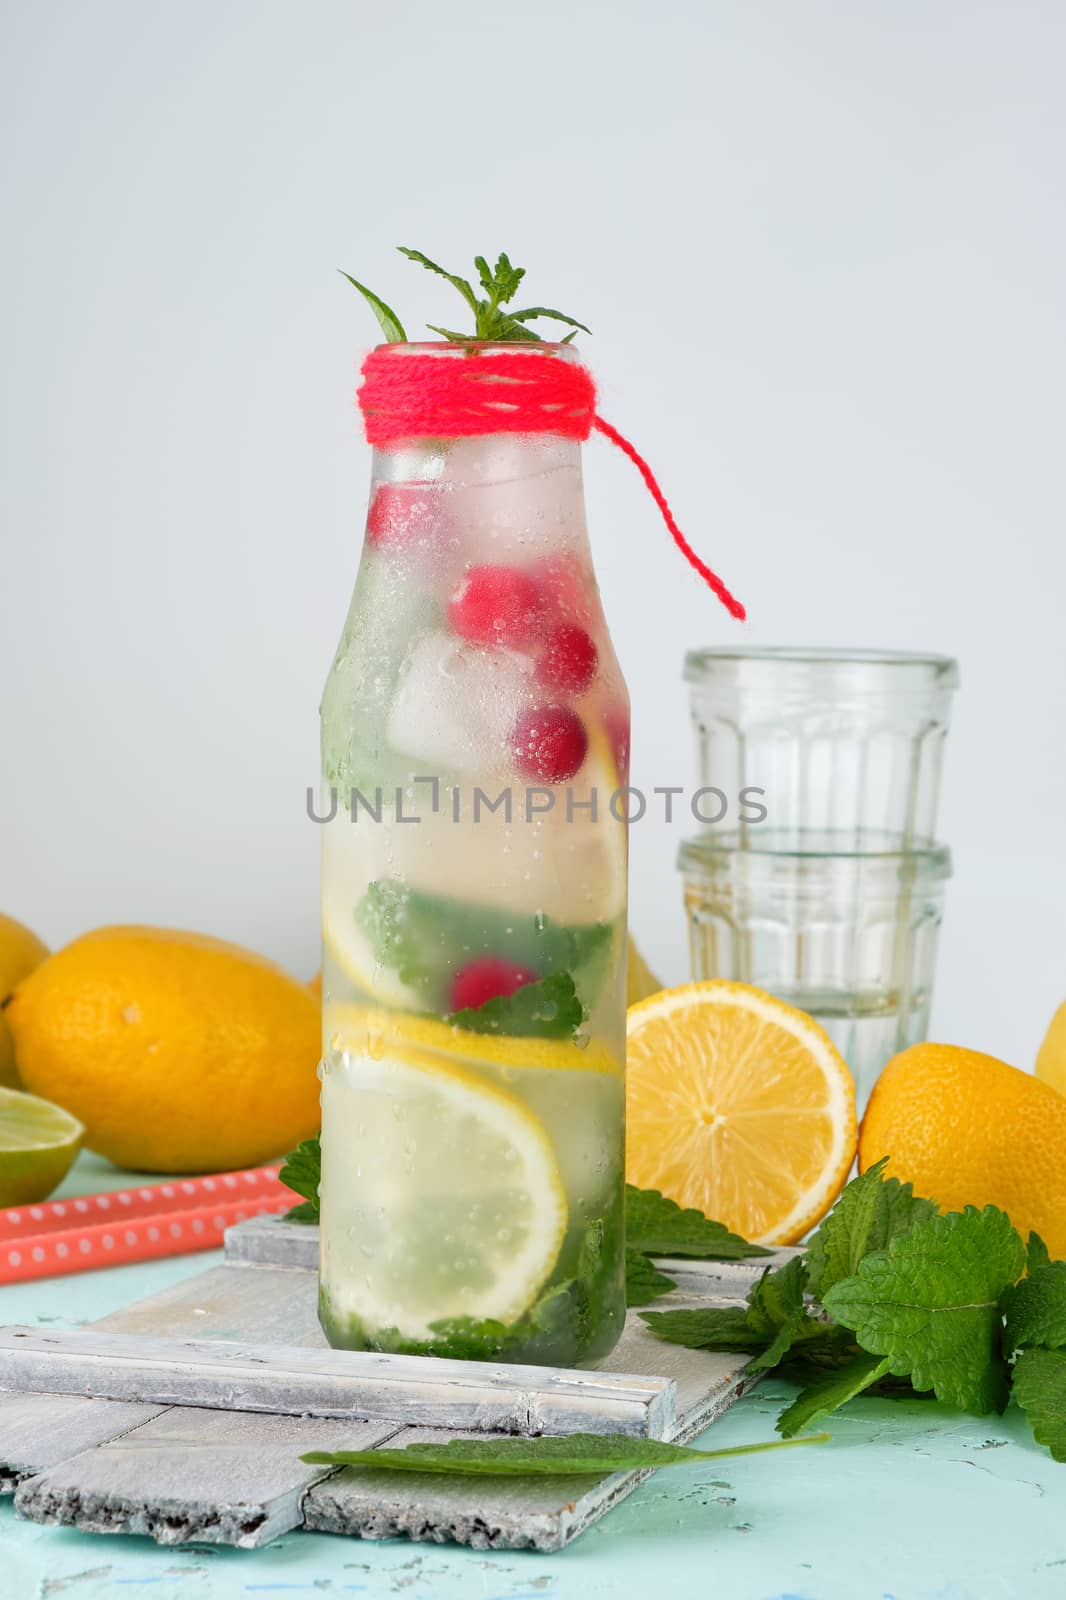 summer refreshing drink lemonade with lemons, cranberry, mint leaves, lime in a glass bottle, next to the ingredients for making a cocktail